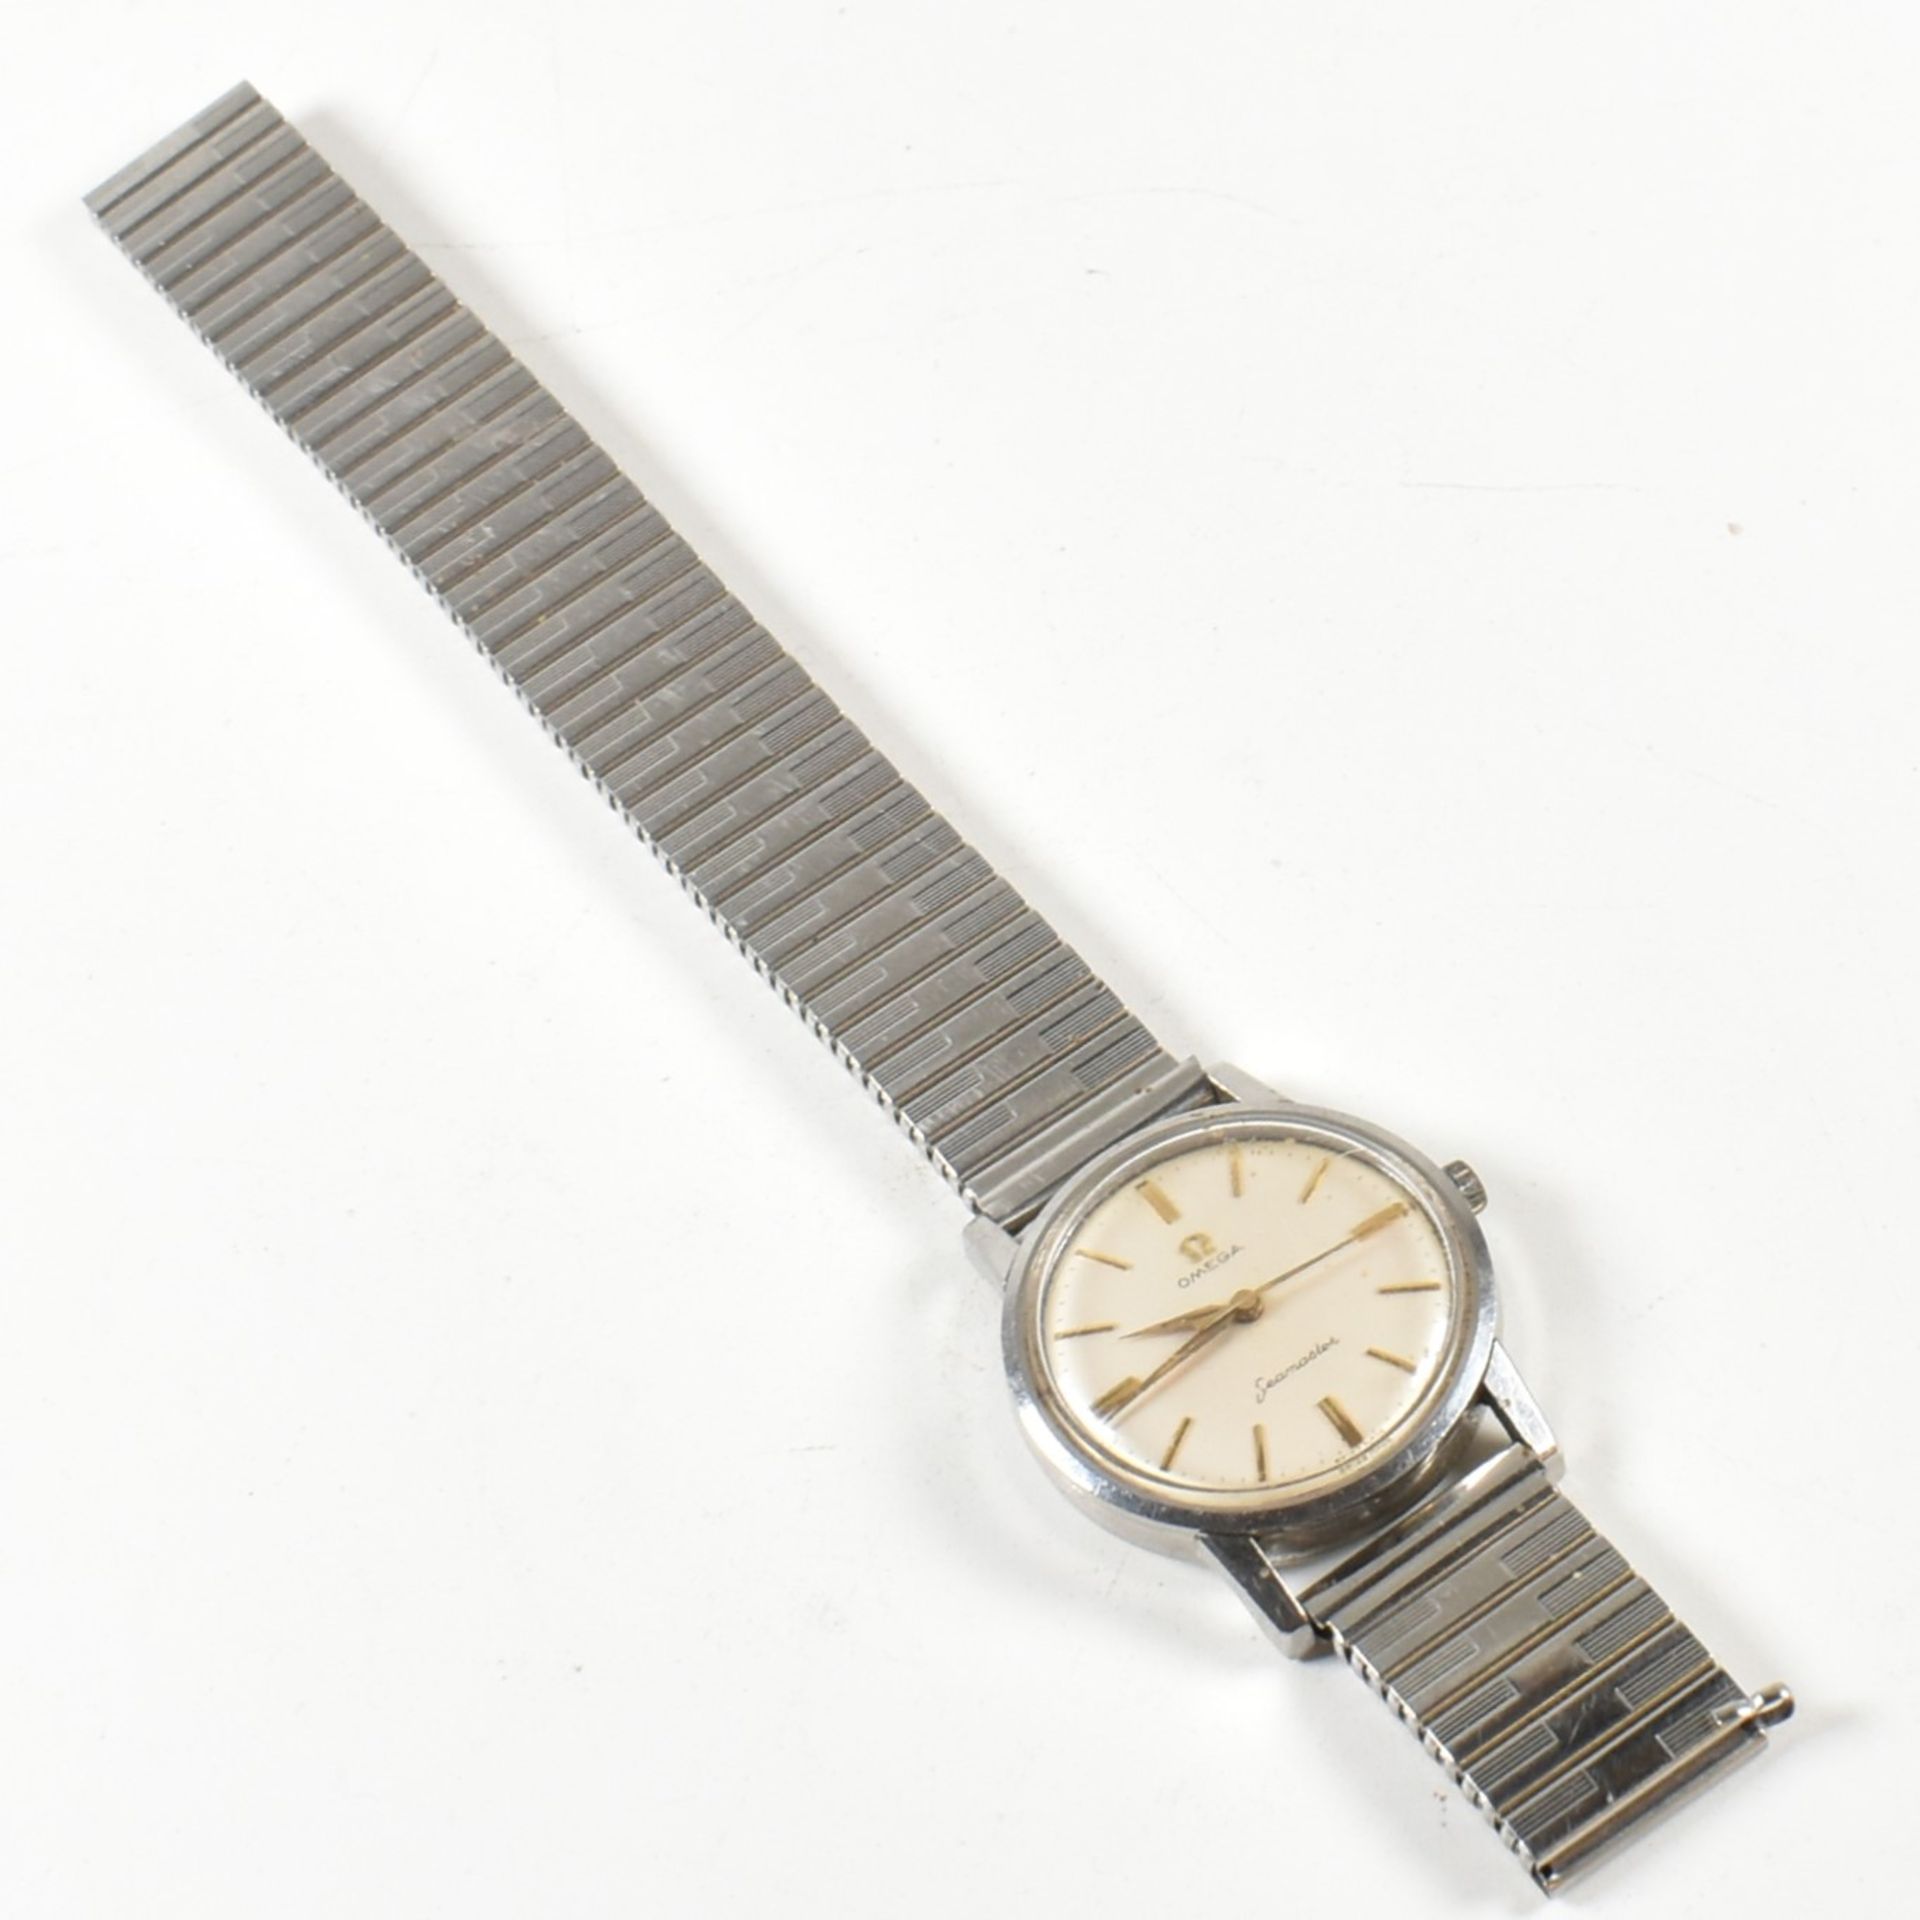 OMEGA SEAMASTER STAINLESS STEEL WATCH - Image 4 of 4